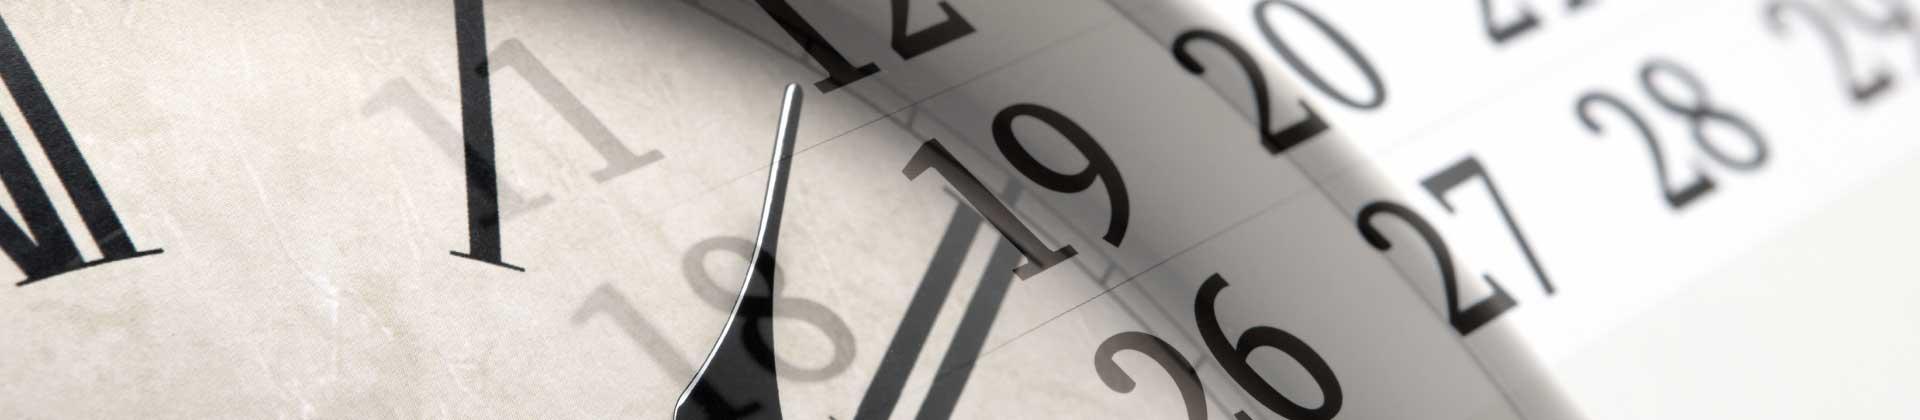 Time and calendar image 